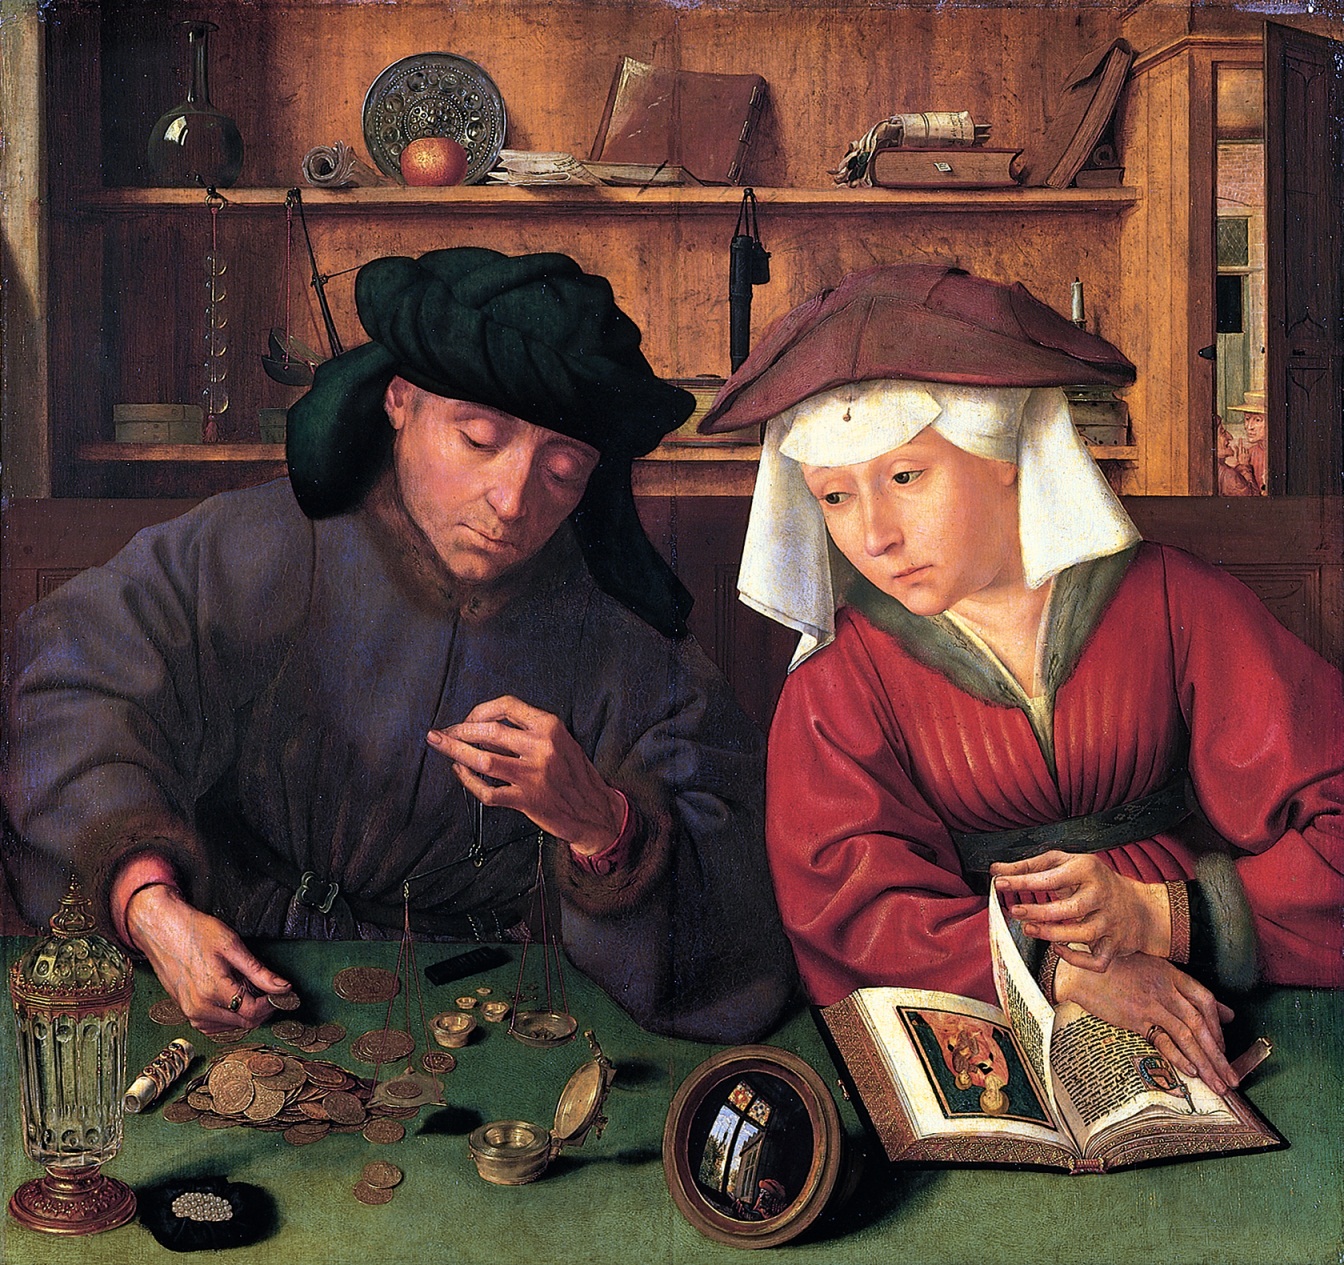 The Money Lender and His Wife (Quentin Metsys, 1514)